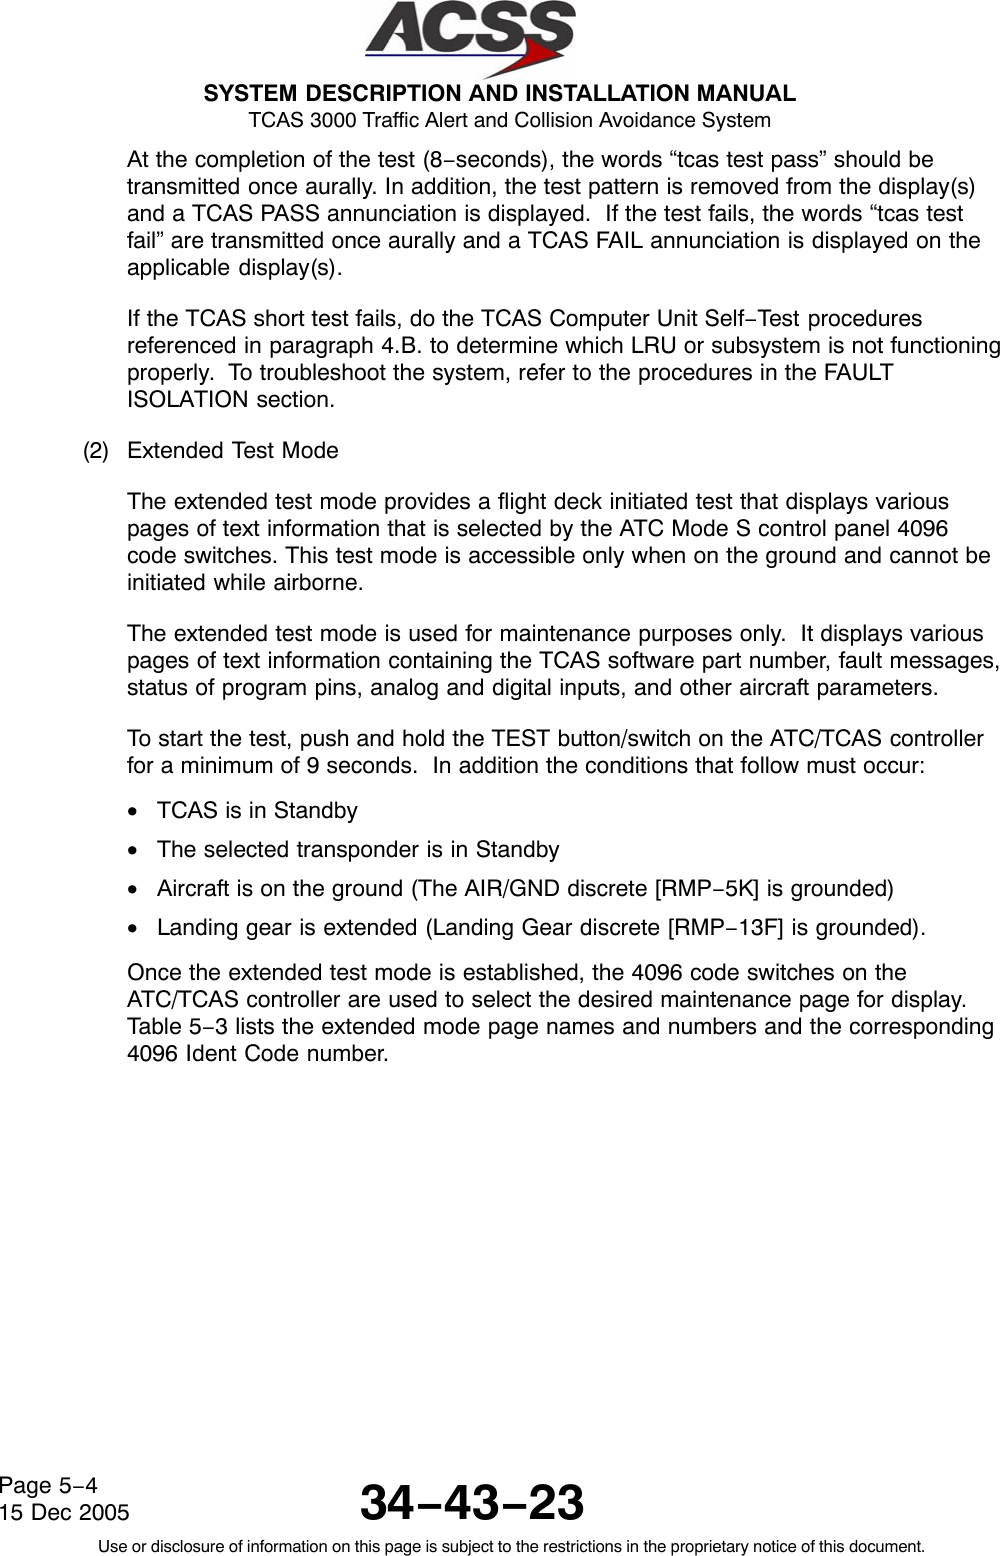  SYSTEM DESCRIPTION AND INSTALLATION MANUAL TCAS 3000 Traffic Alert and Collision Avoidance System34−43−23Use or disclosure of information on this page is subject to the restrictions in the proprietary notice of this document.Page 5−415 Dec 2005At the completion of the test (8−seconds), the words “tcas test pass” should betransmitted once aurally. In addition, the test pattern is removed from the display(s)and a TCAS PASS annunciation is displayed.  If the test fails, the words “tcas testfail” are transmitted once aurally and a TCAS FAIL annunciation is displayed on theapplicable display(s).If the TCAS short test fails, do the TCAS Computer Unit Self−Test proceduresreferenced in paragraph 4.B. to determine which LRU or subsystem is not functioningproperly.  To troubleshoot the system, refer to the procedures in the FAULTISOLATION section.(2) Extended Test ModeThe extended test mode provides a flight deck initiated test that displays variouspages of text information that is selected by the ATC Mode S control panel 4096code switches. This test mode is accessible only when on the ground and cannot beinitiated while airborne.The extended test mode is used for maintenance purposes only.  It displays variouspages of text information containing the TCAS software part number, fault messages,status of program pins, analog and digital inputs, and other aircraft parameters.To start the test, push and hold the TEST button/switch on the ATC/TCAS controllerfor a minimum of 9 seconds.  In addition the conditions that follow must occur:•TCAS is in Standby•The selected transponder is in Standby•Aircraft is on the ground (The AIR/GND discrete [RMP−5K] is grounded)•Landing gear is extended (Landing Gear discrete [RMP−13F] is grounded).Once the extended test mode is established, the 4096 code switches on theATC/TCAS controller are used to select the desired maintenance page for display.Table 5−3 lists the extended mode page names and numbers and the corresponding4096 Ident Code number.